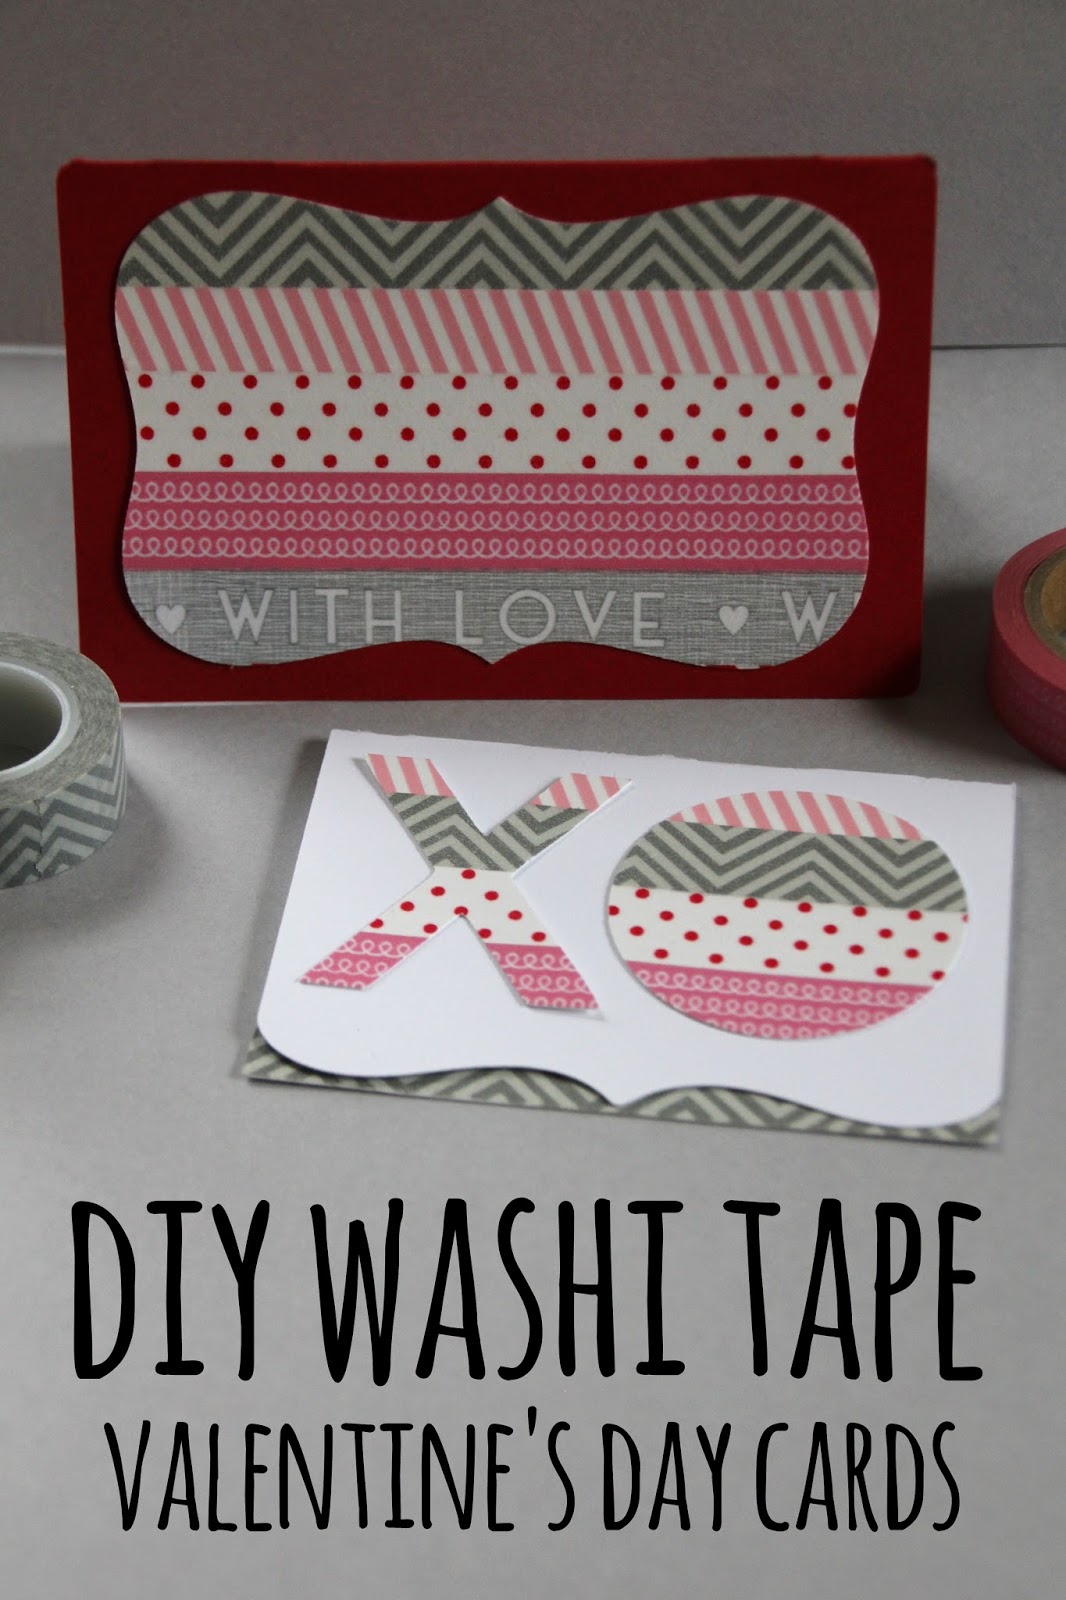 DIY EASY WASHI TAPE VALENTINE'S DAY CARDS – Our Sweet Somewhere